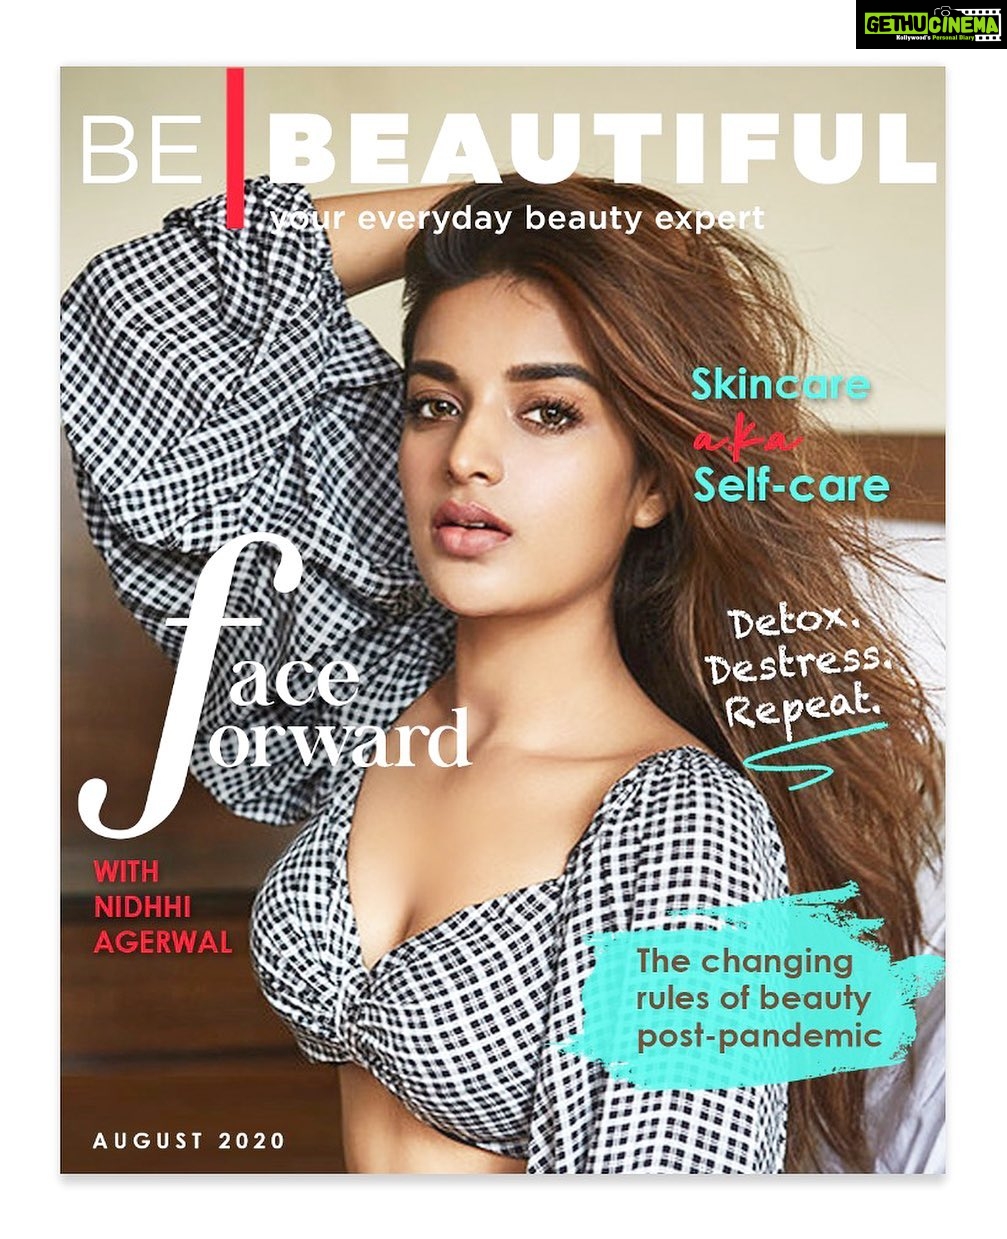 Nidhhi Agerwal - 546.1K Likes - Most Liked Instagram Photos